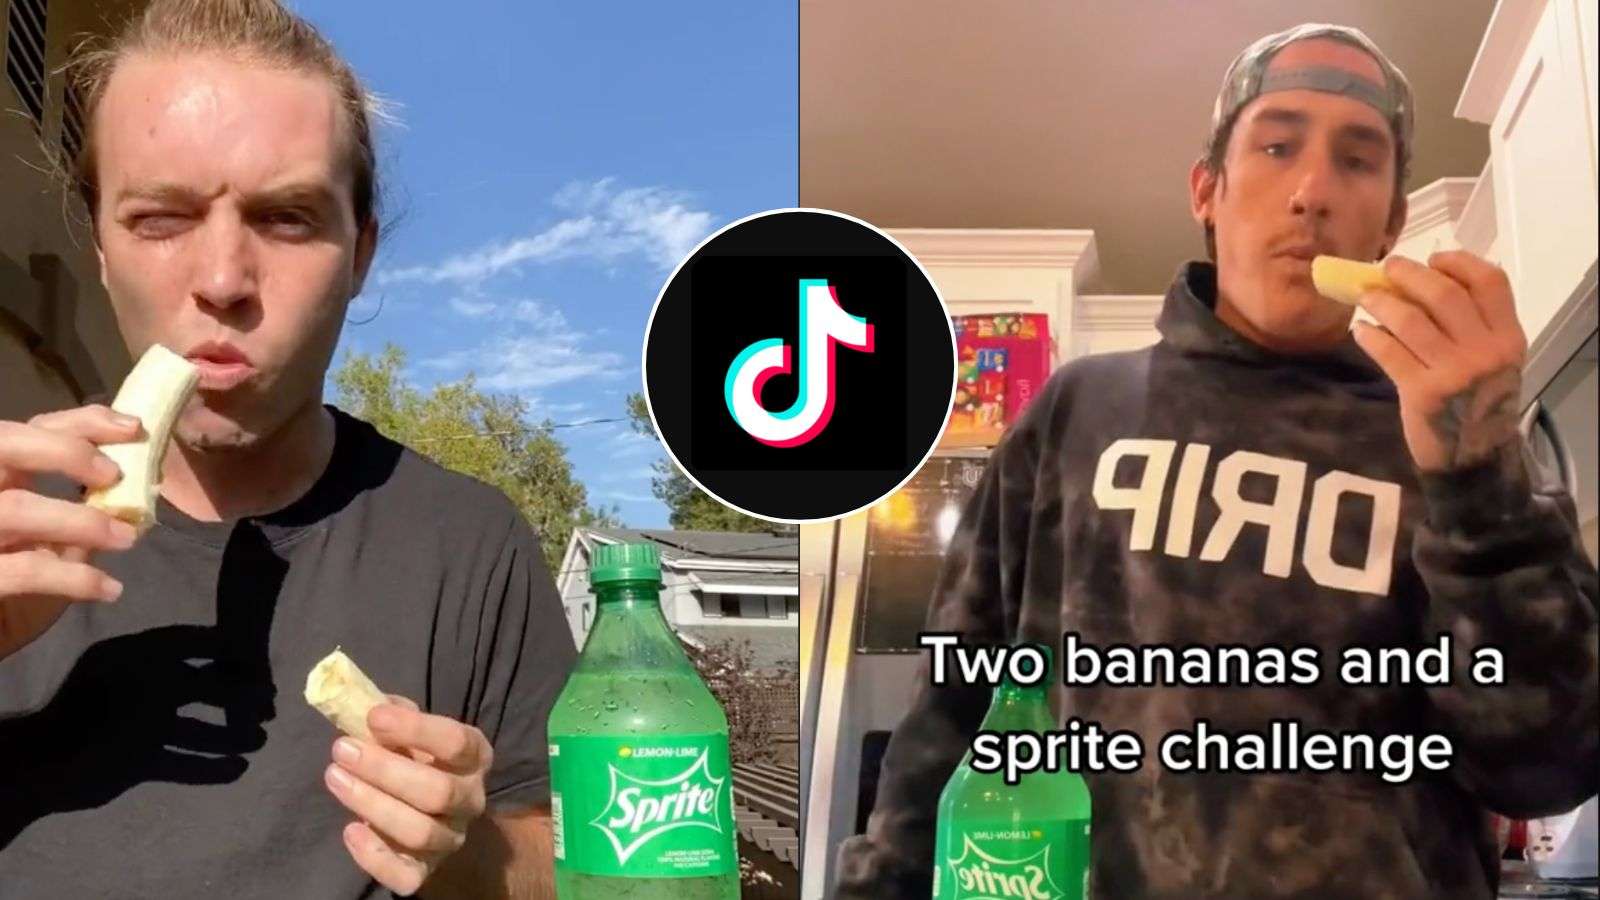 What is the banana and sprite challenge?